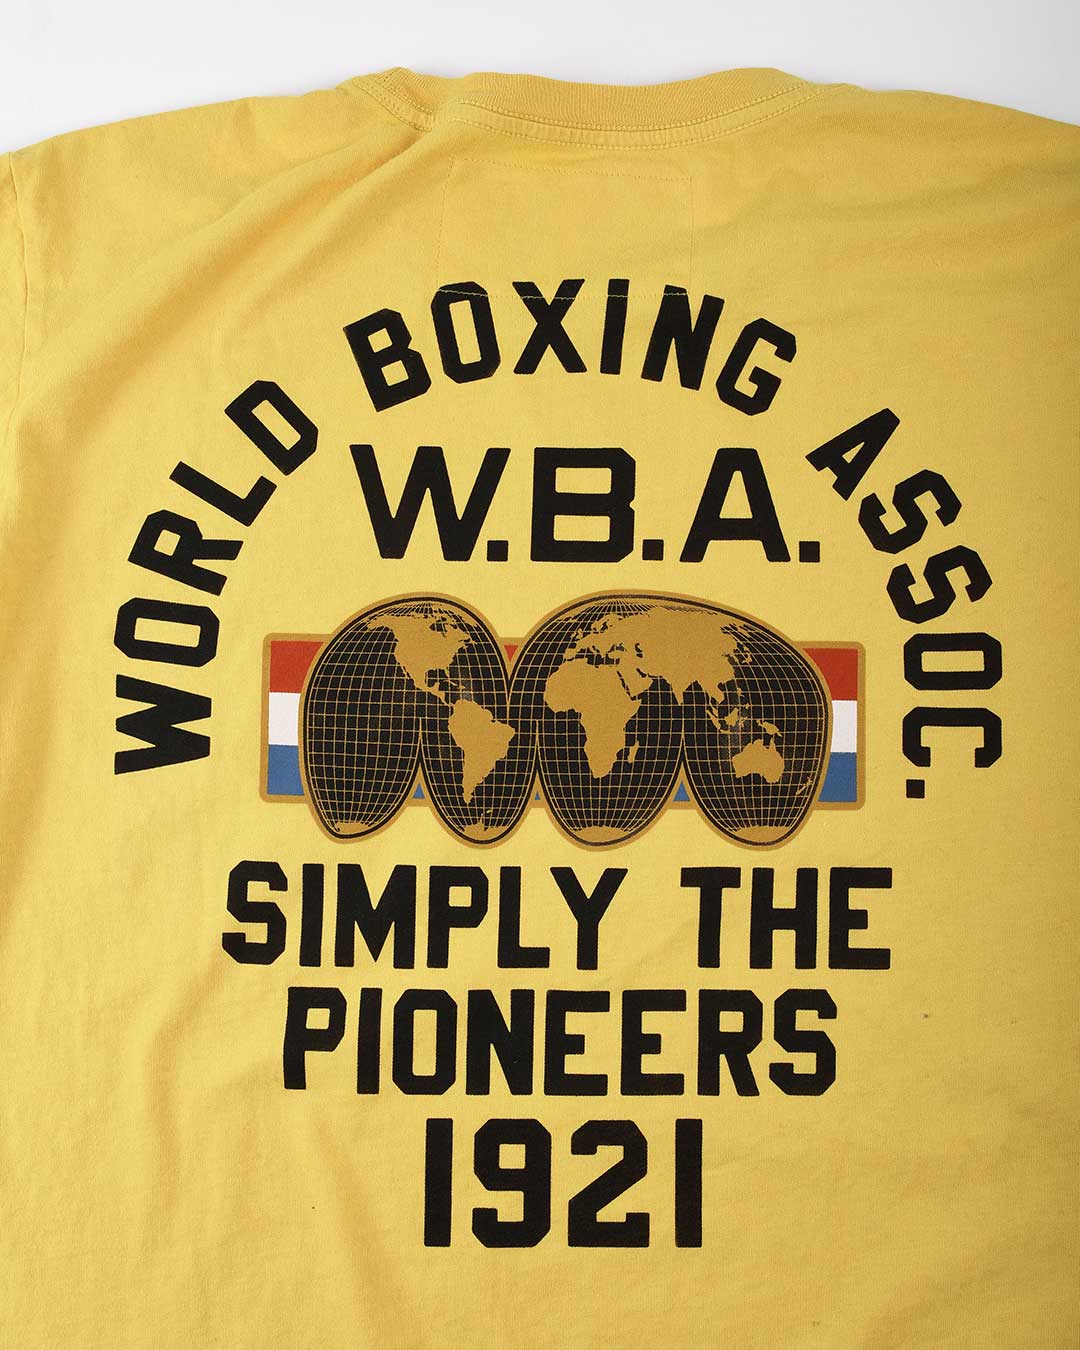 WBA 1921 Simply The Pioneers Yellow Tee - Roots of Fight